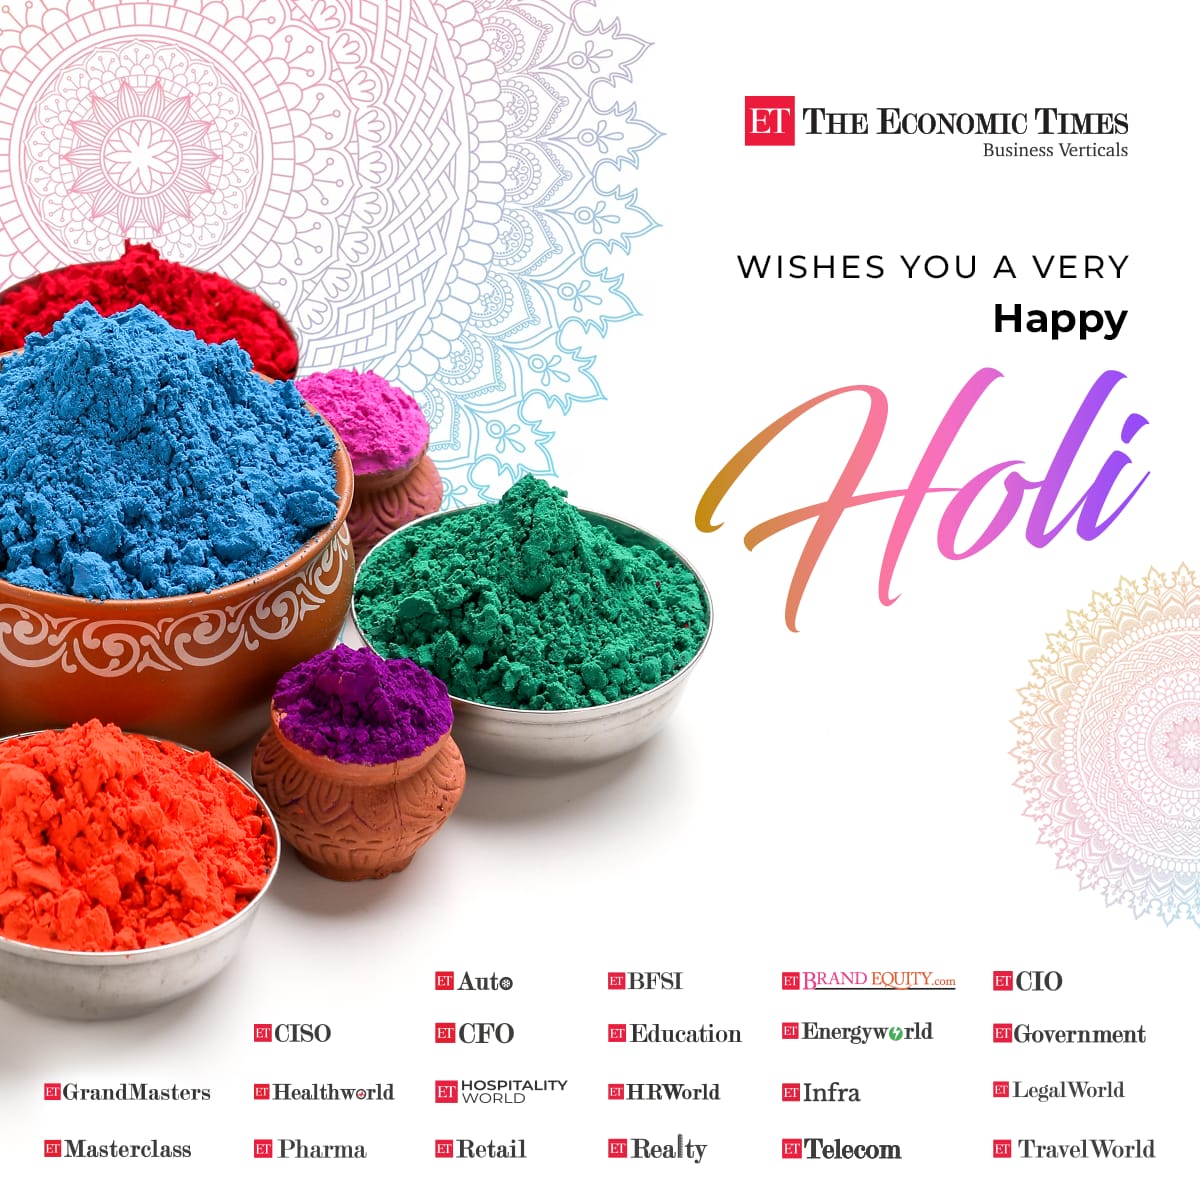 May your life be filled with vibrant colors of joy, love, and laughter this Holi! Wishing everyone a happy and colorful celebration. #HappyHoli